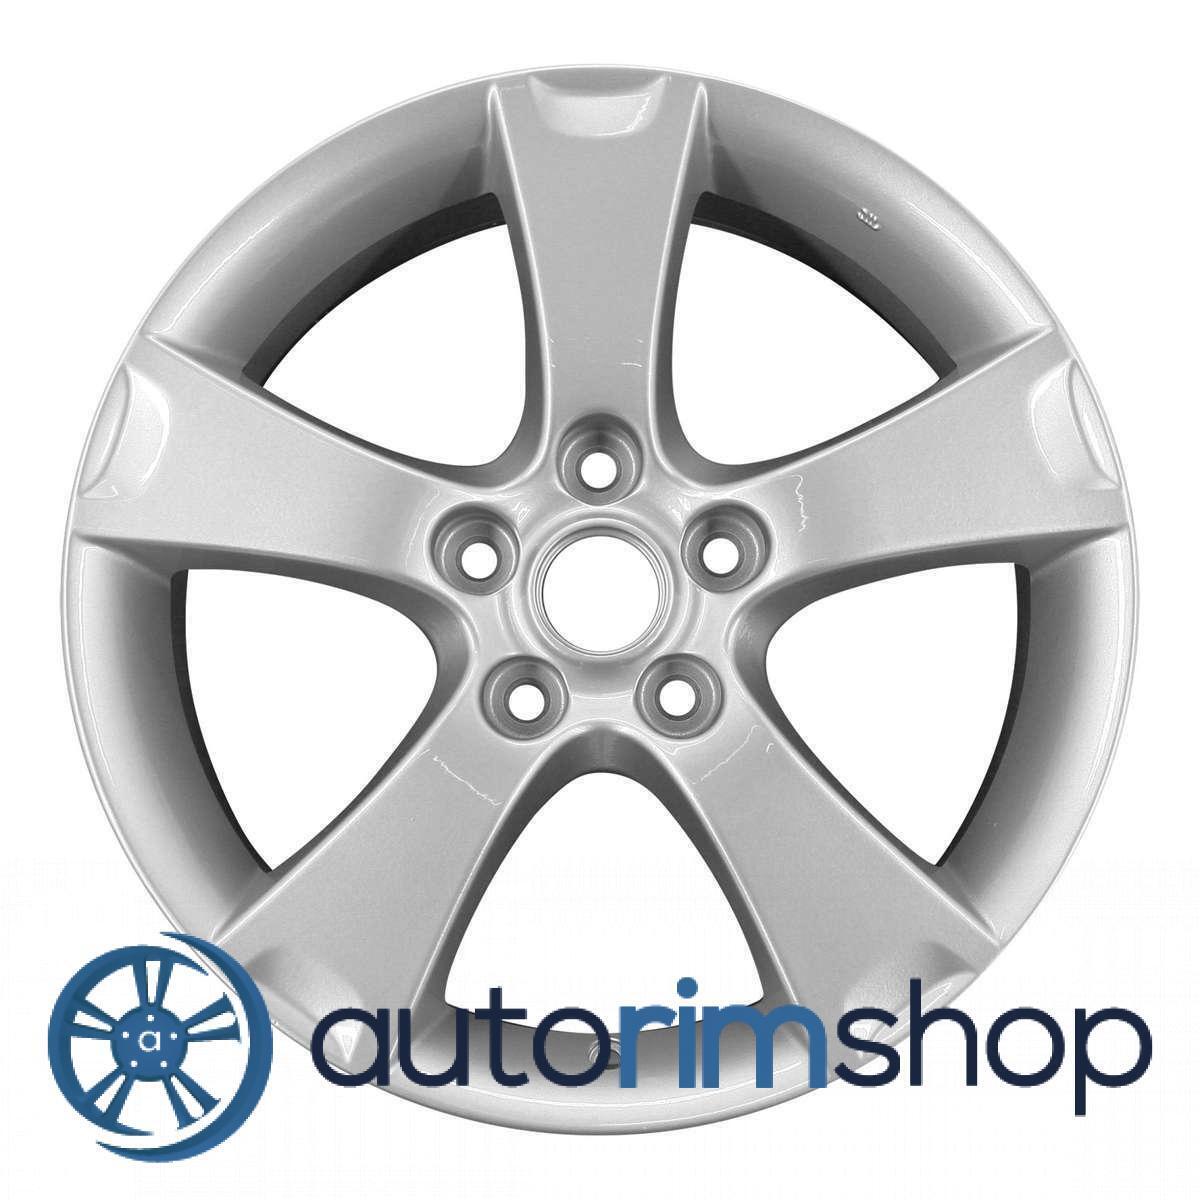 New 17" Replacement Rim for Mazda 3 2004 2005 2006 Wheel